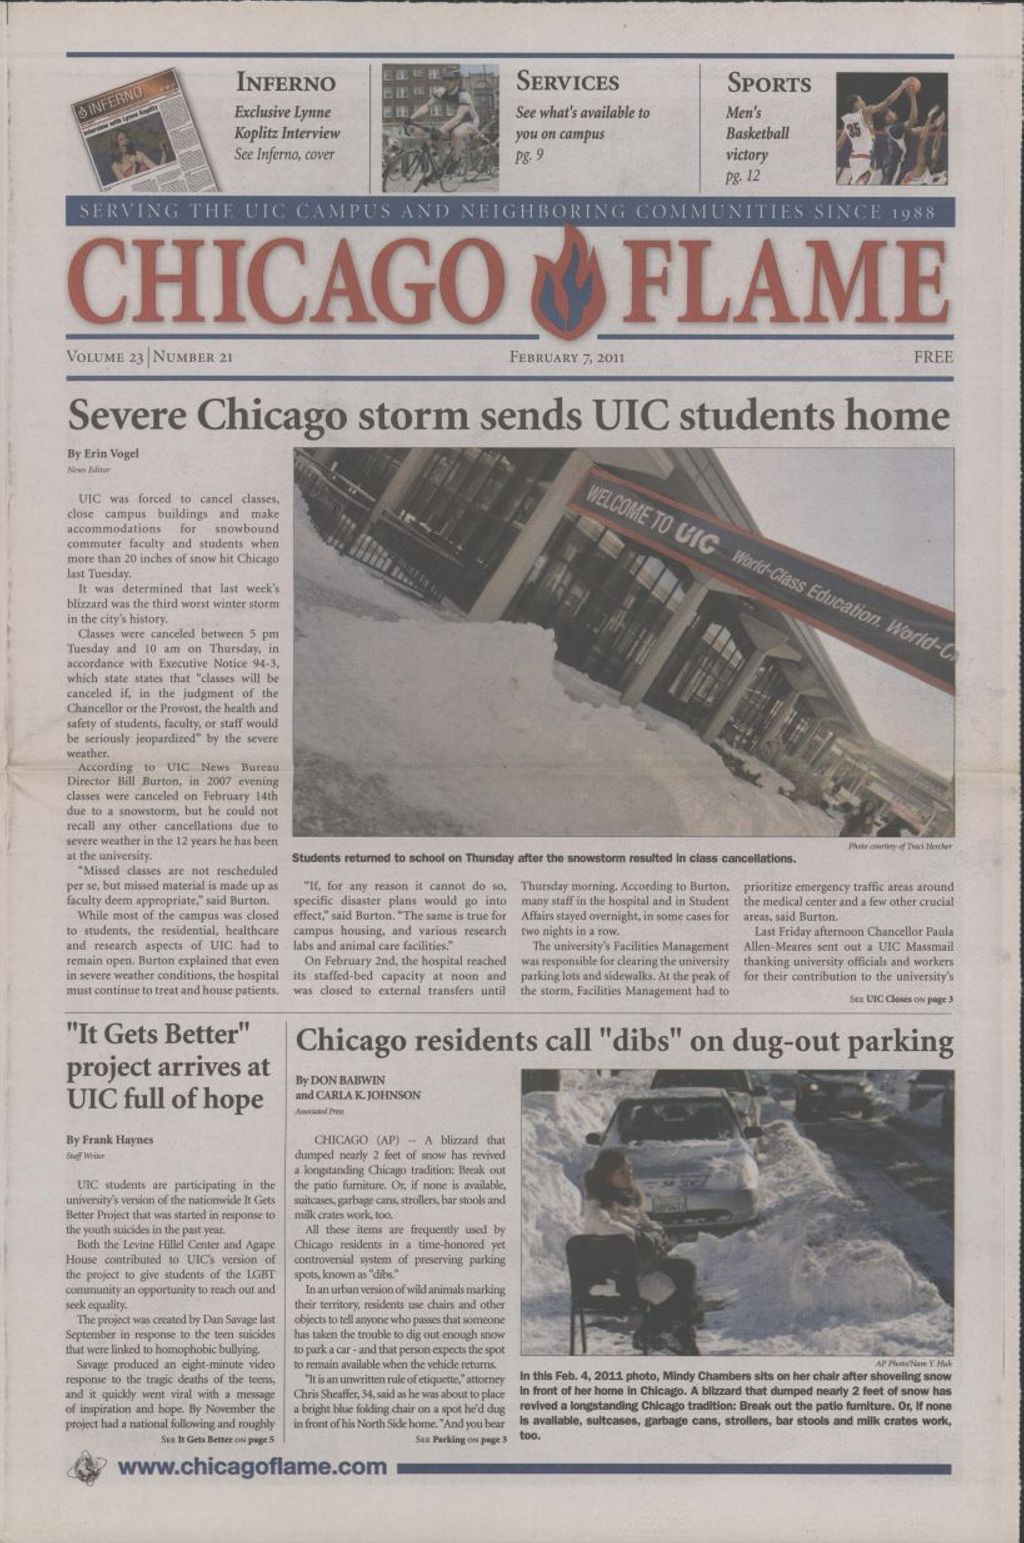 Miniature of Chicago Flame (February 7, 2011)